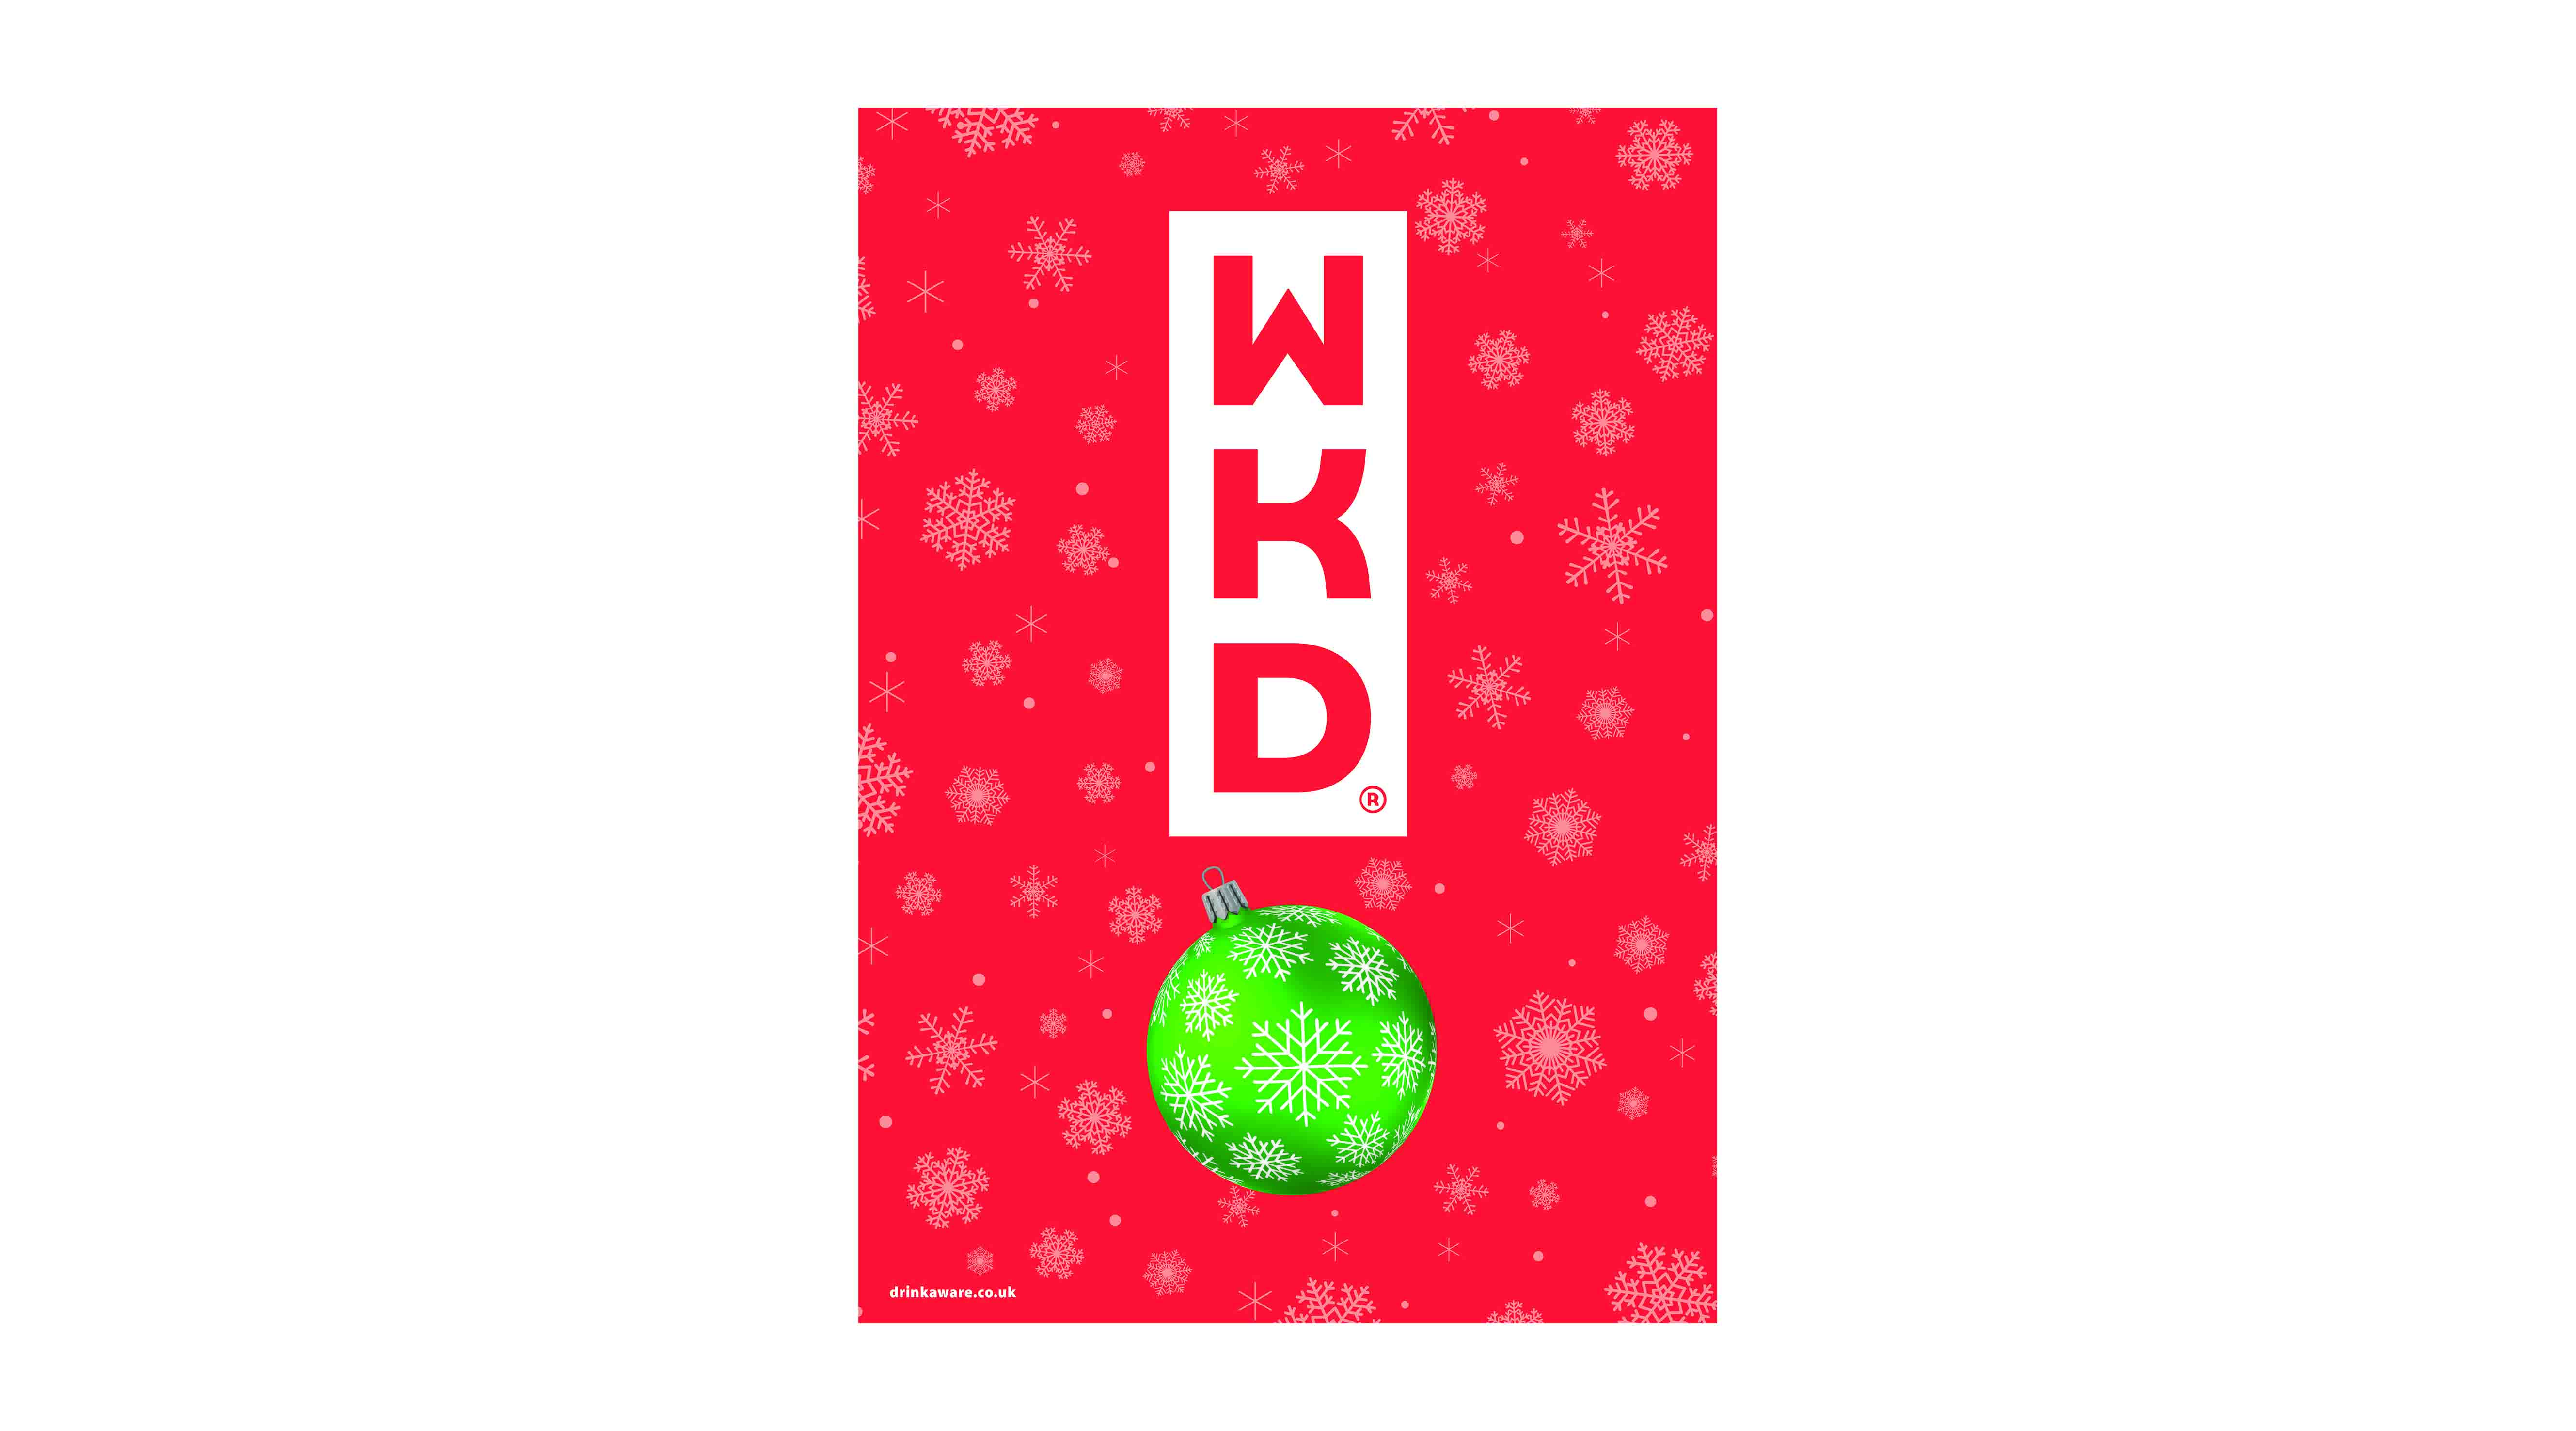 WKD tops the list of party 'must haves' at Christmas.